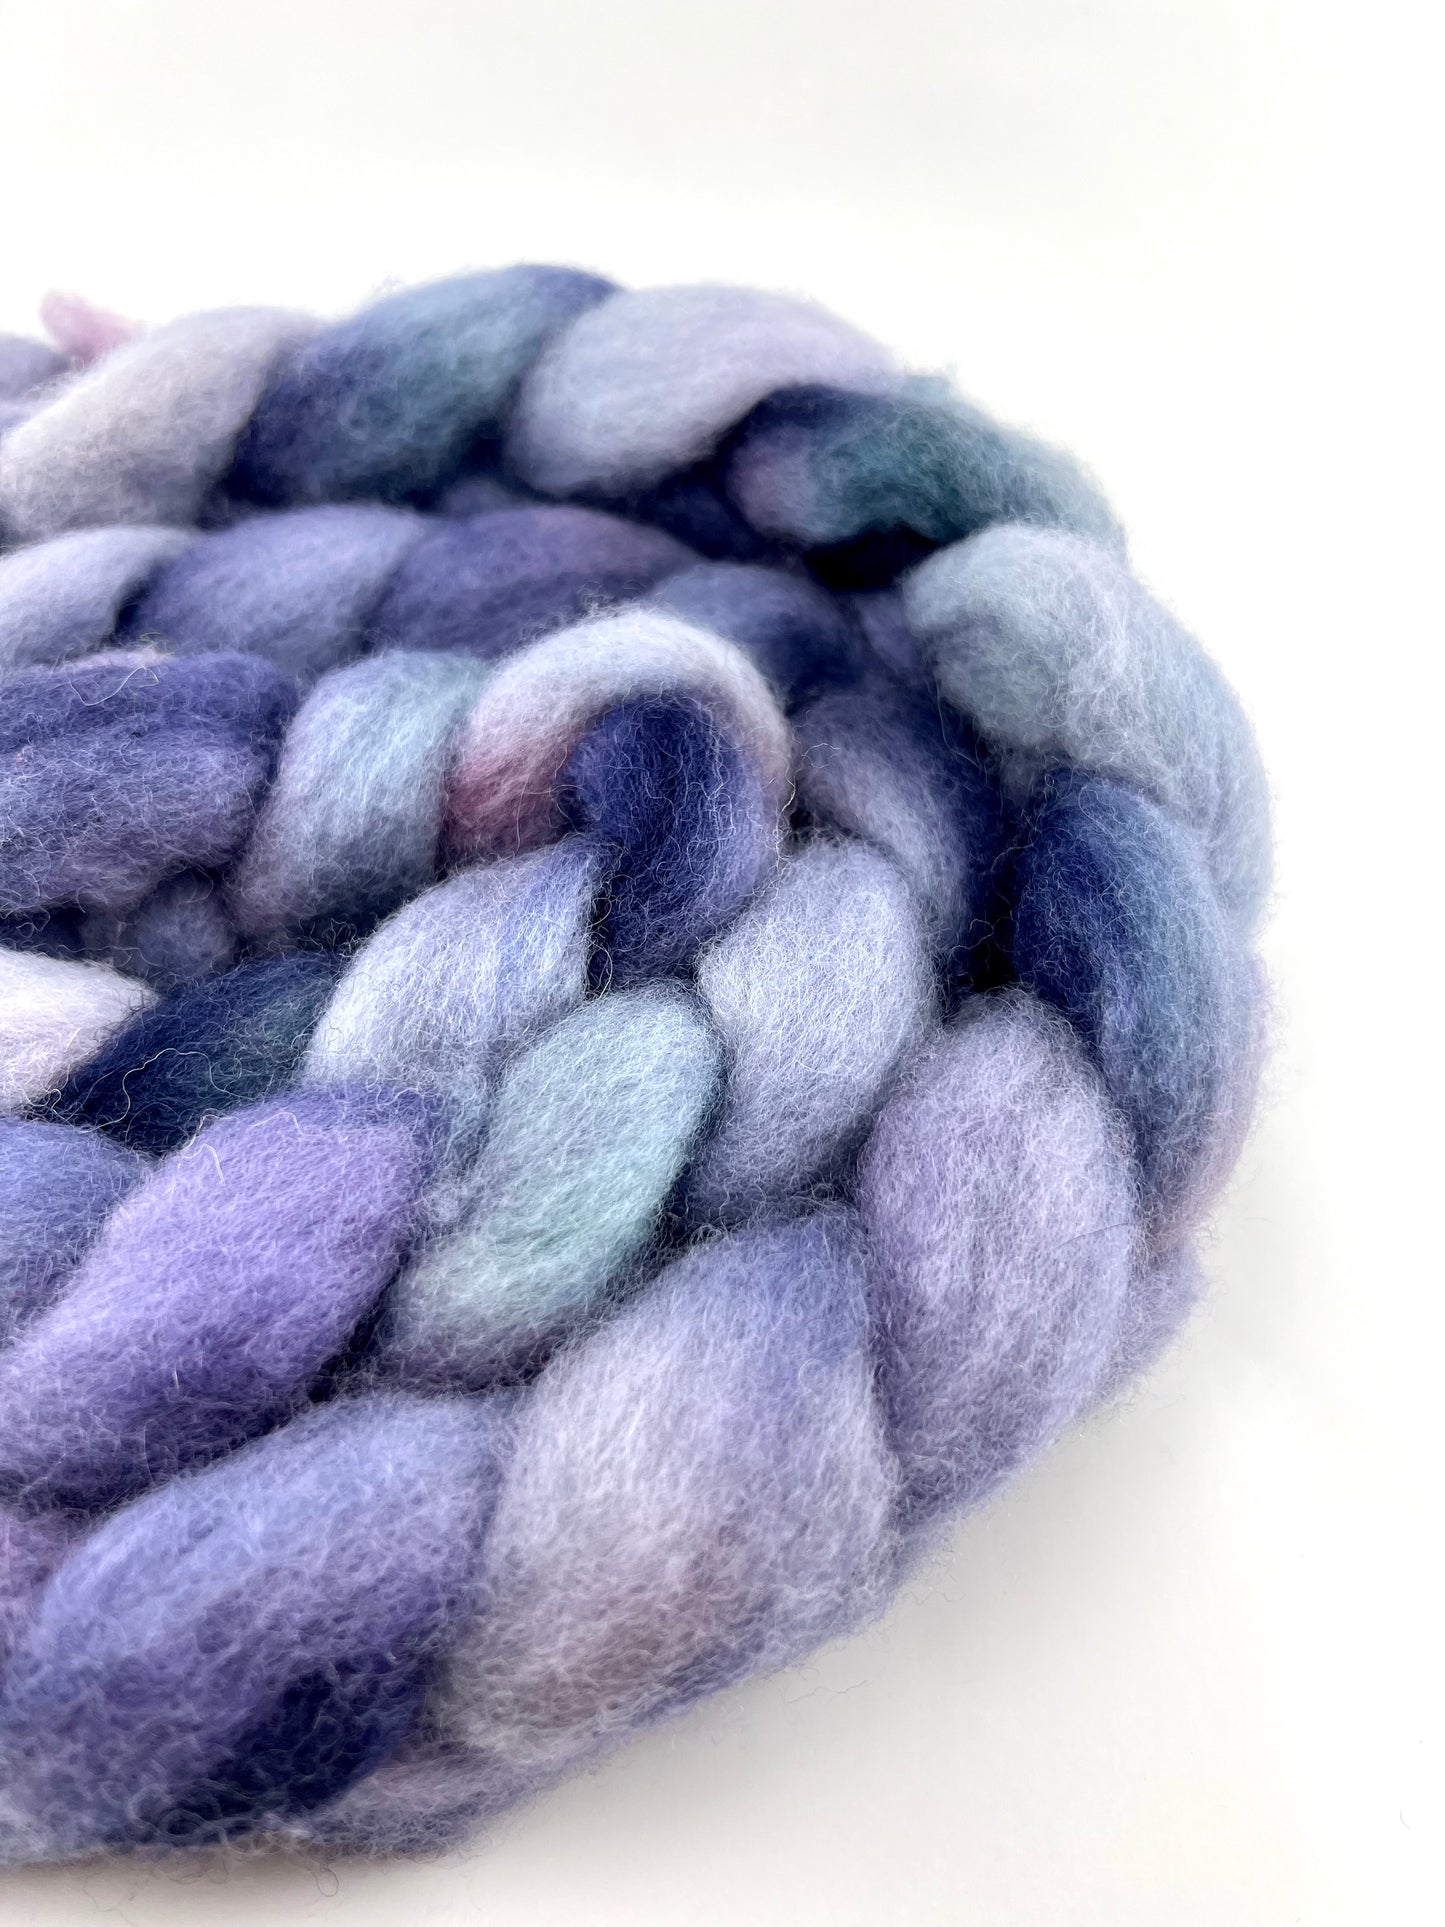 SOFT BLUES Hand Dyed Spinning Fibre Purple Blue Corriedale Top Non Superwash